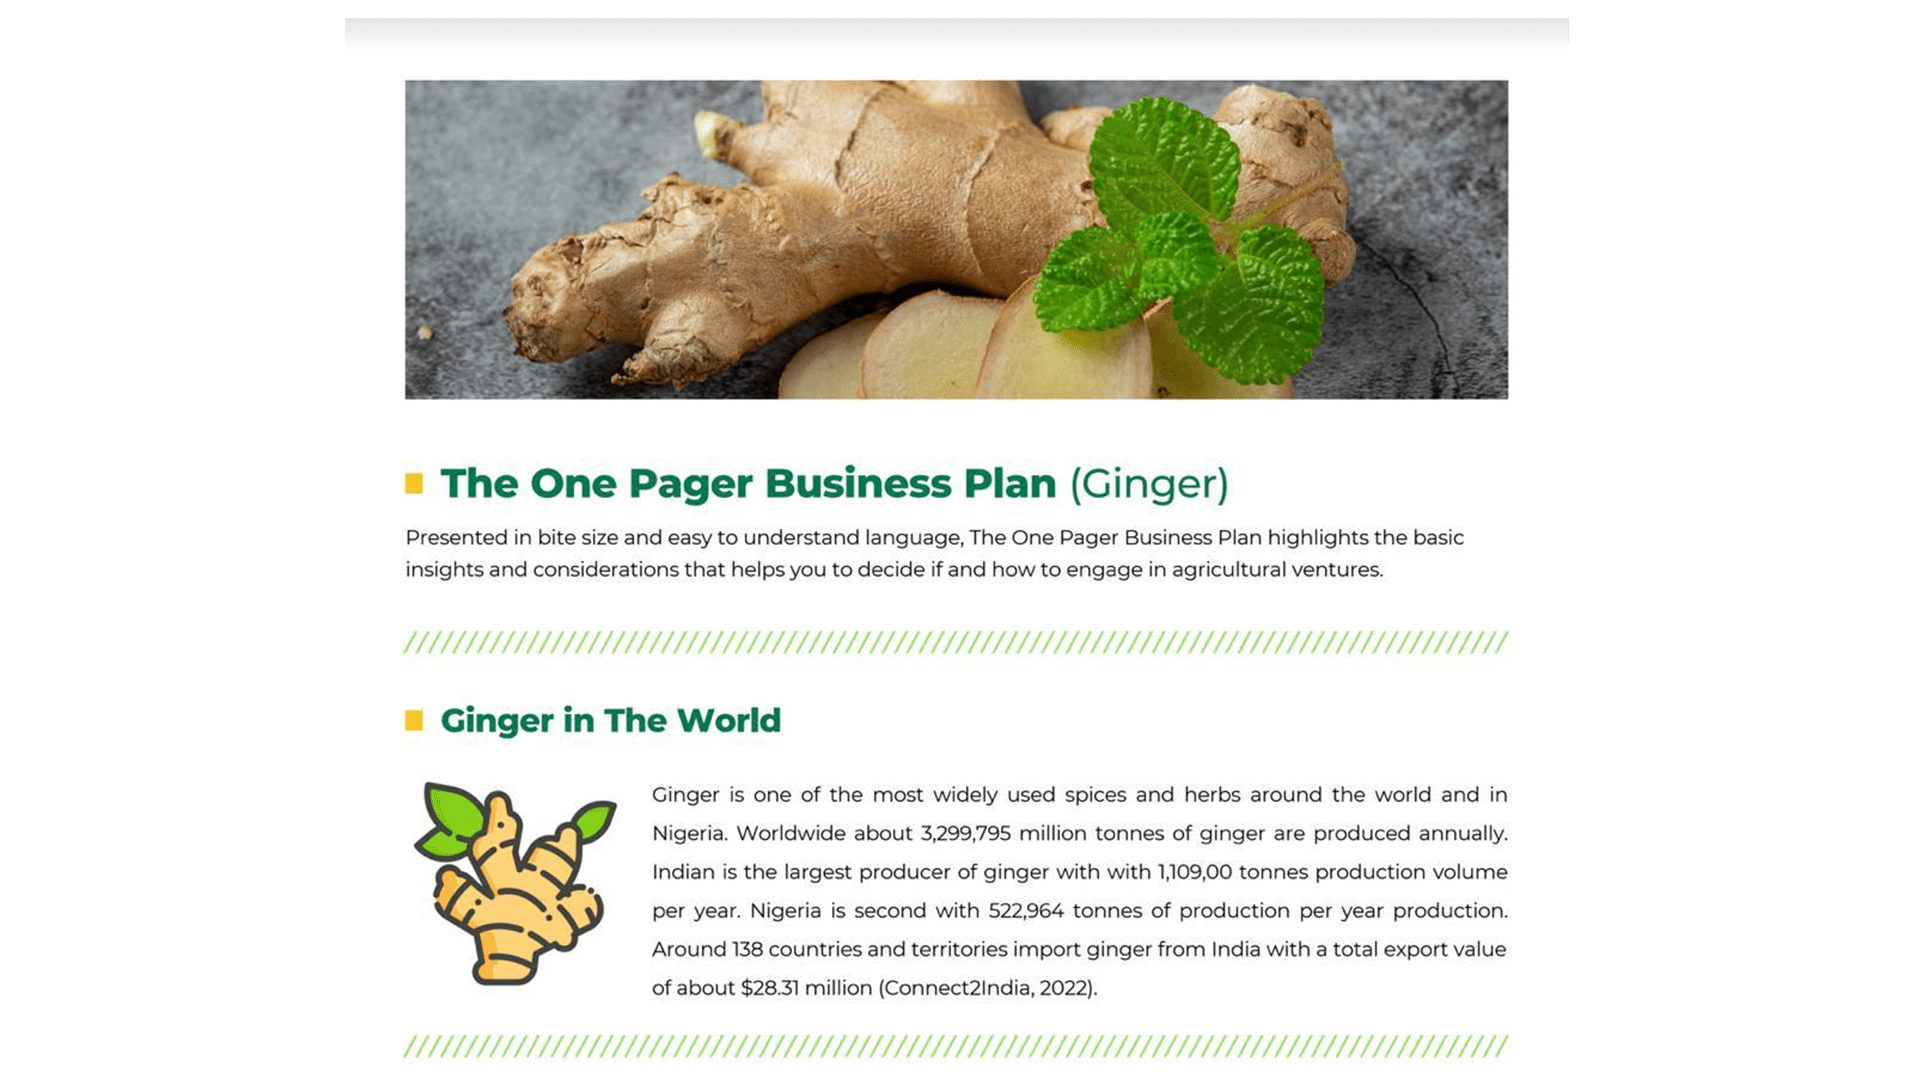 One Pager Business Plan